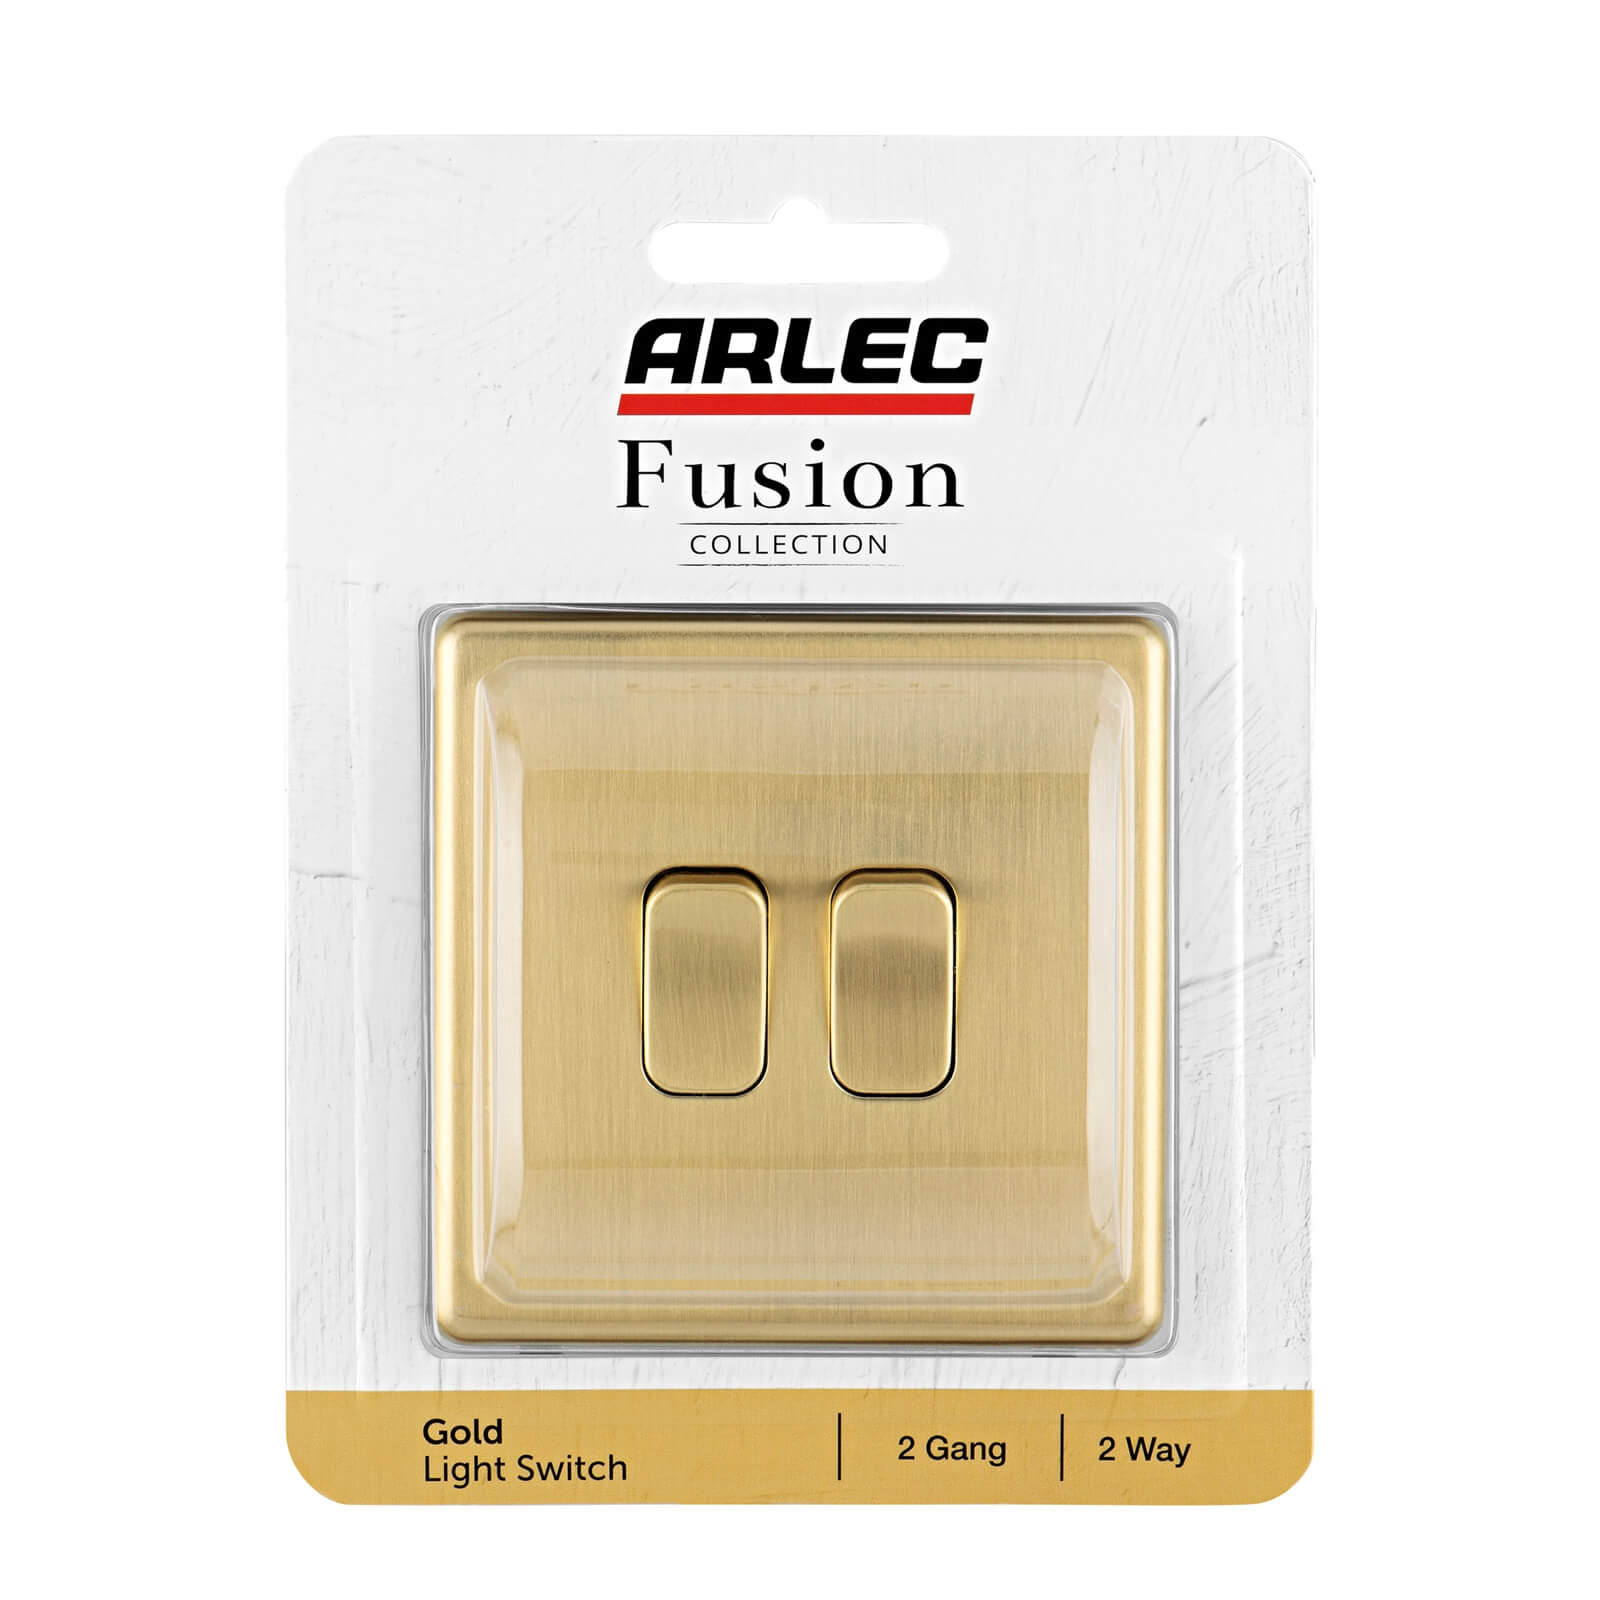 Arlec Fusion 10A 2 Gang 2 Way Gold Double light switch